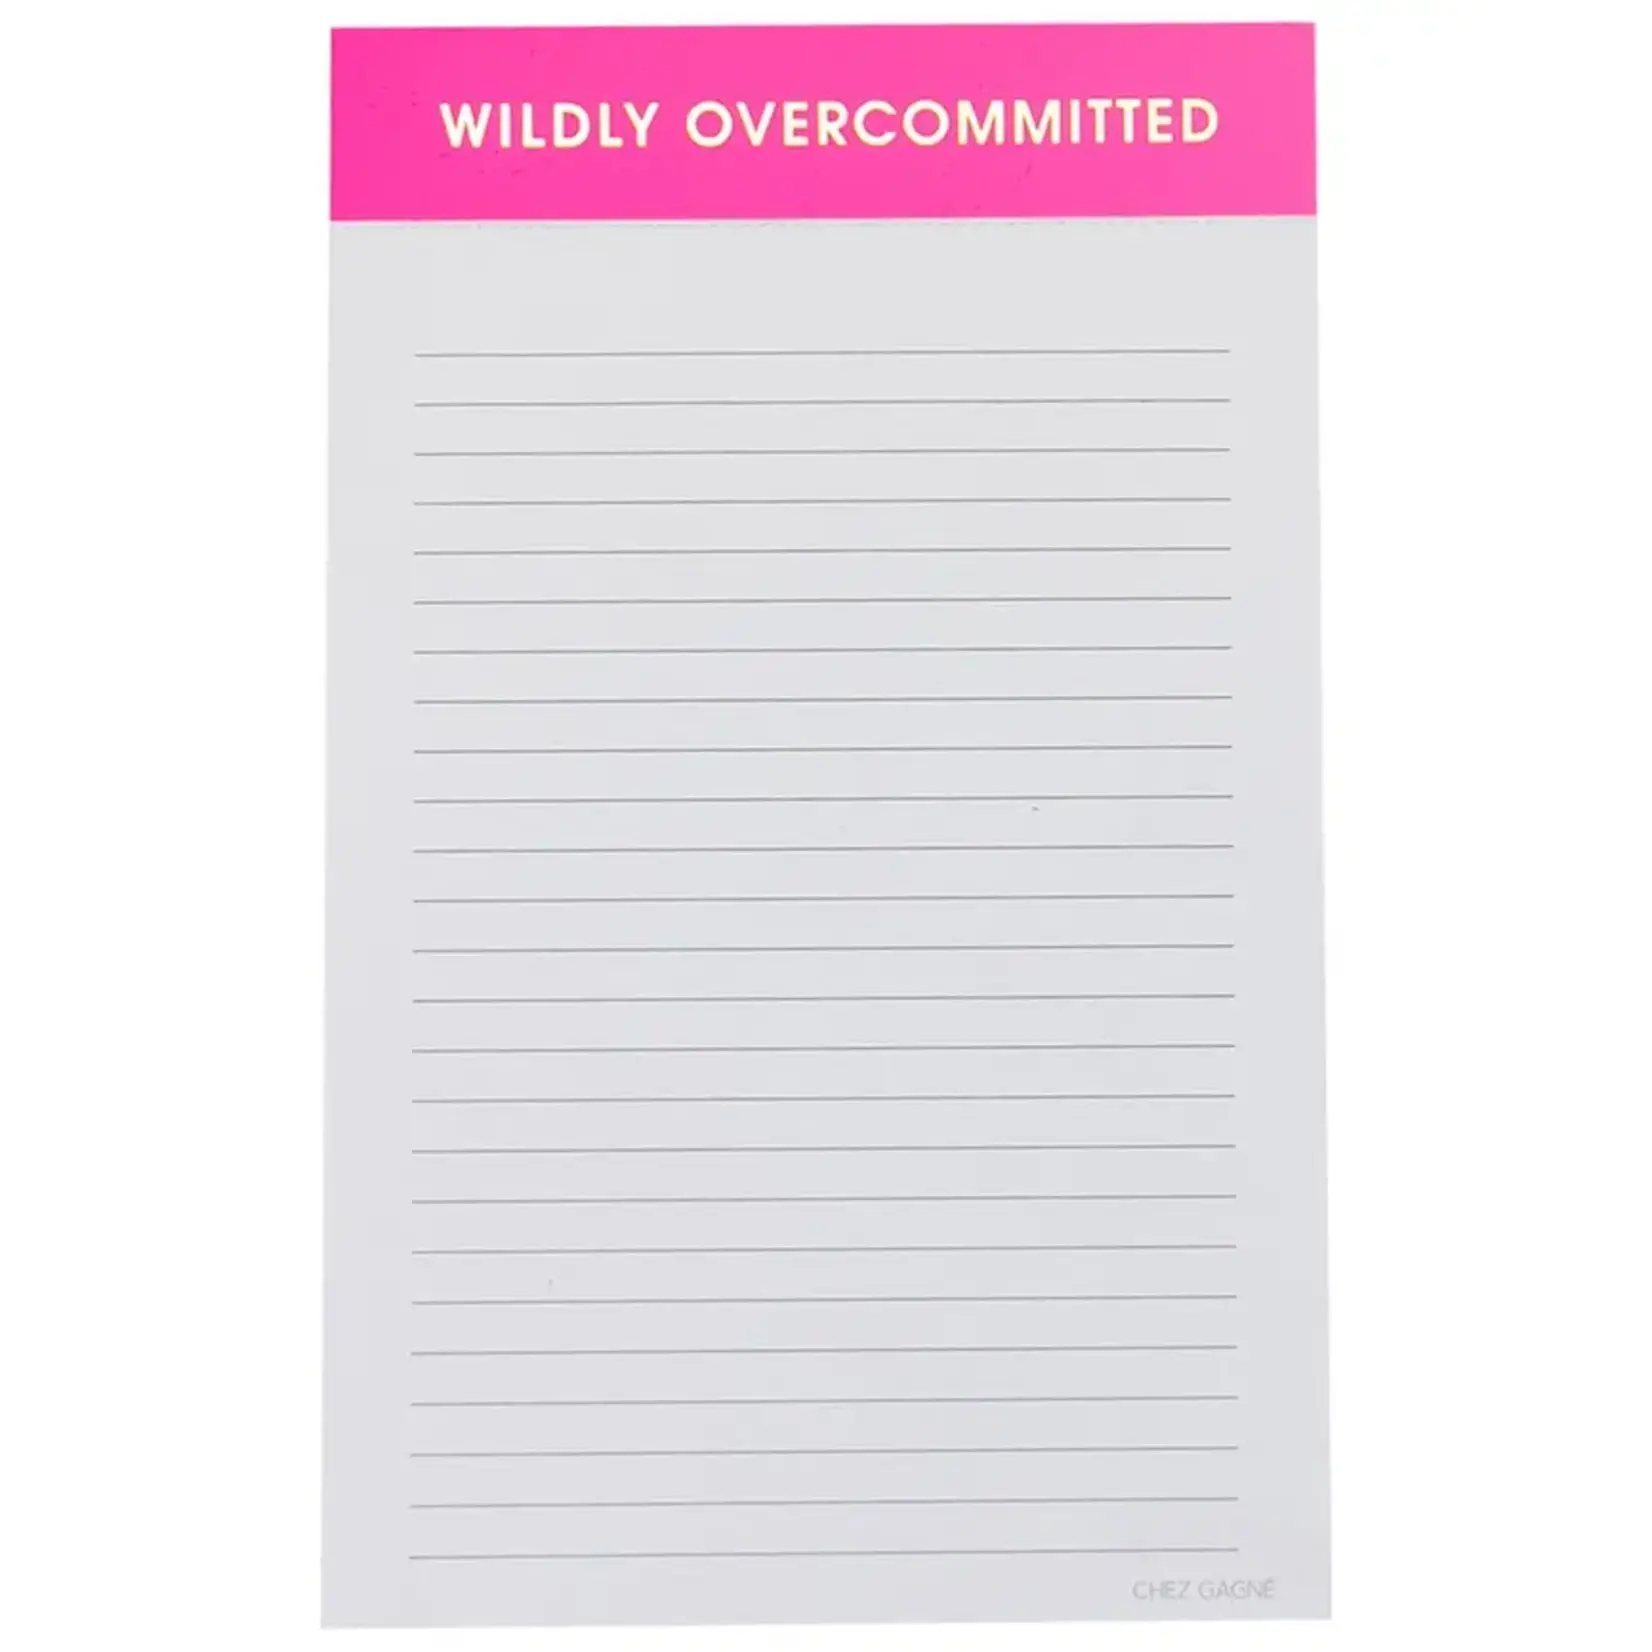 Chez Gagné "Wildly Overcommitted" Notepad